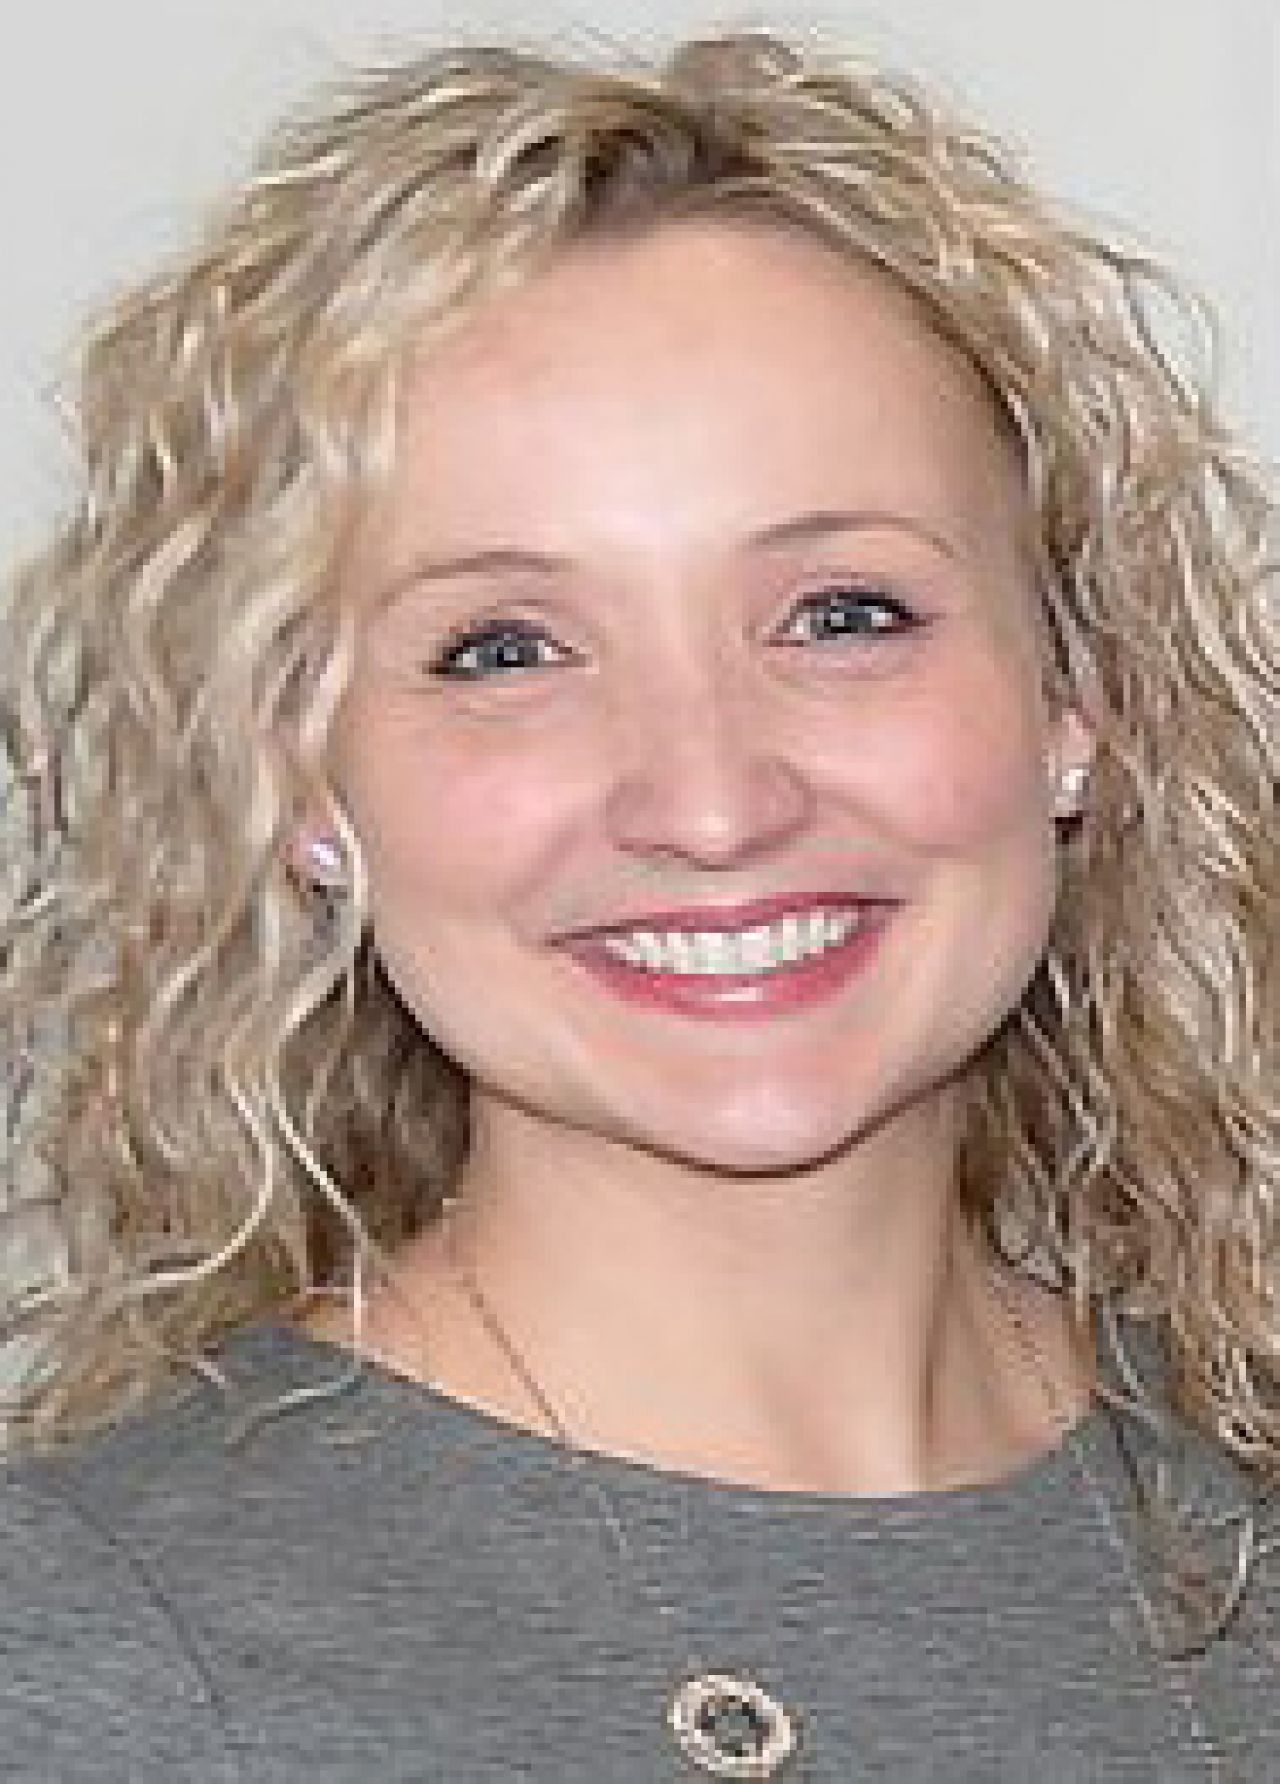 A woman with wavy blonde hair wearing a grey sweater smiles broadly.